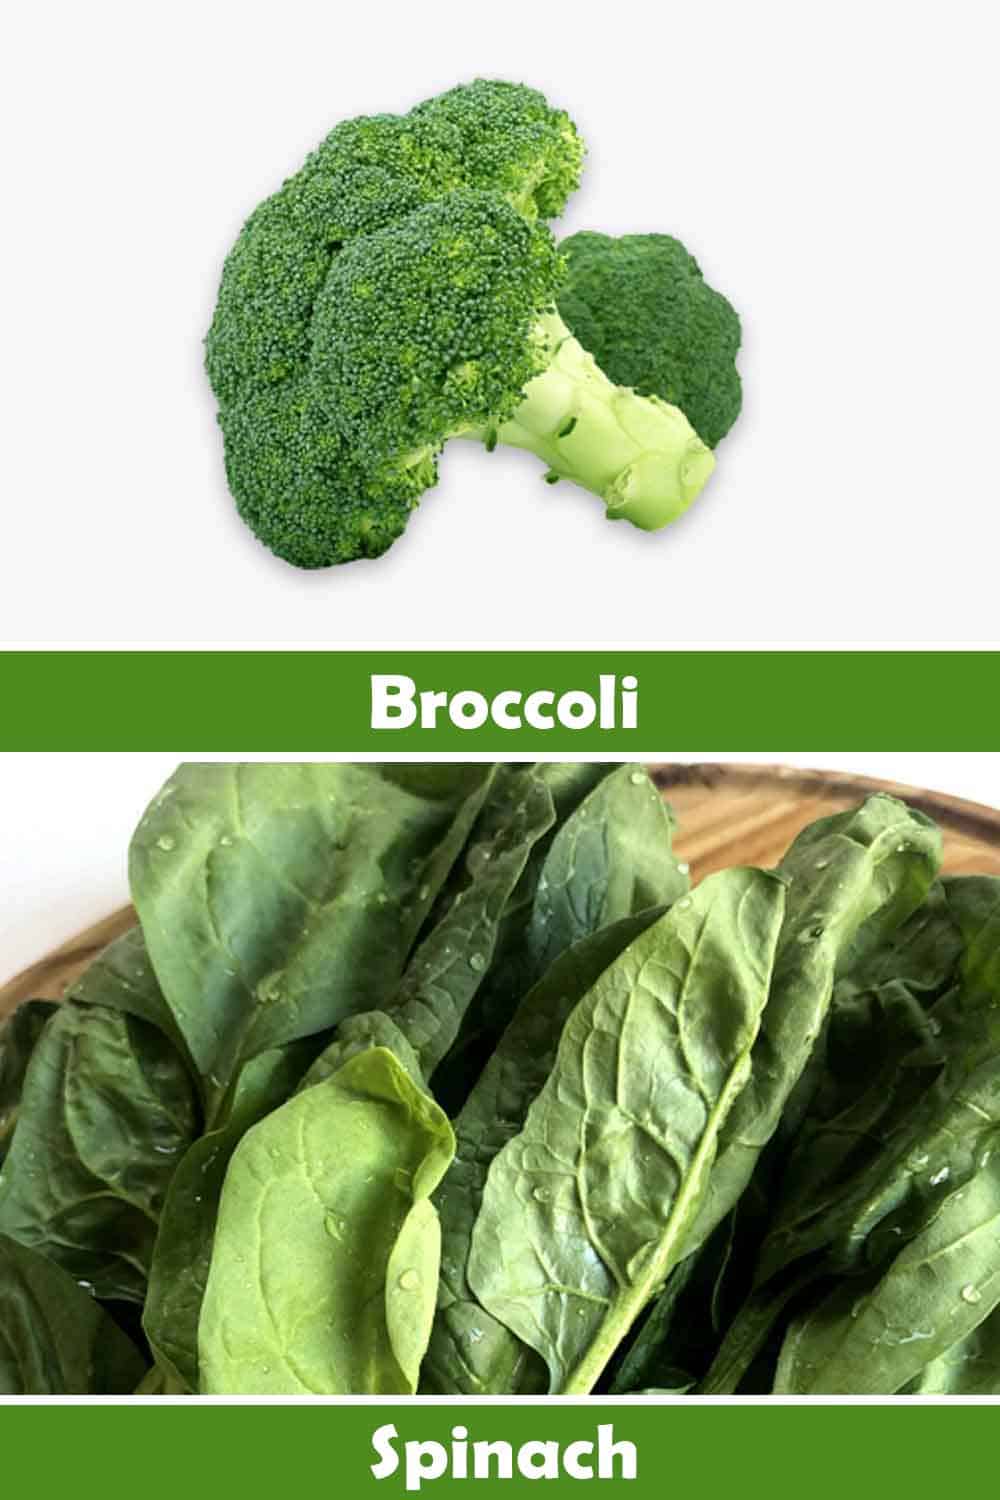 BROCCOLI AND SPINACH